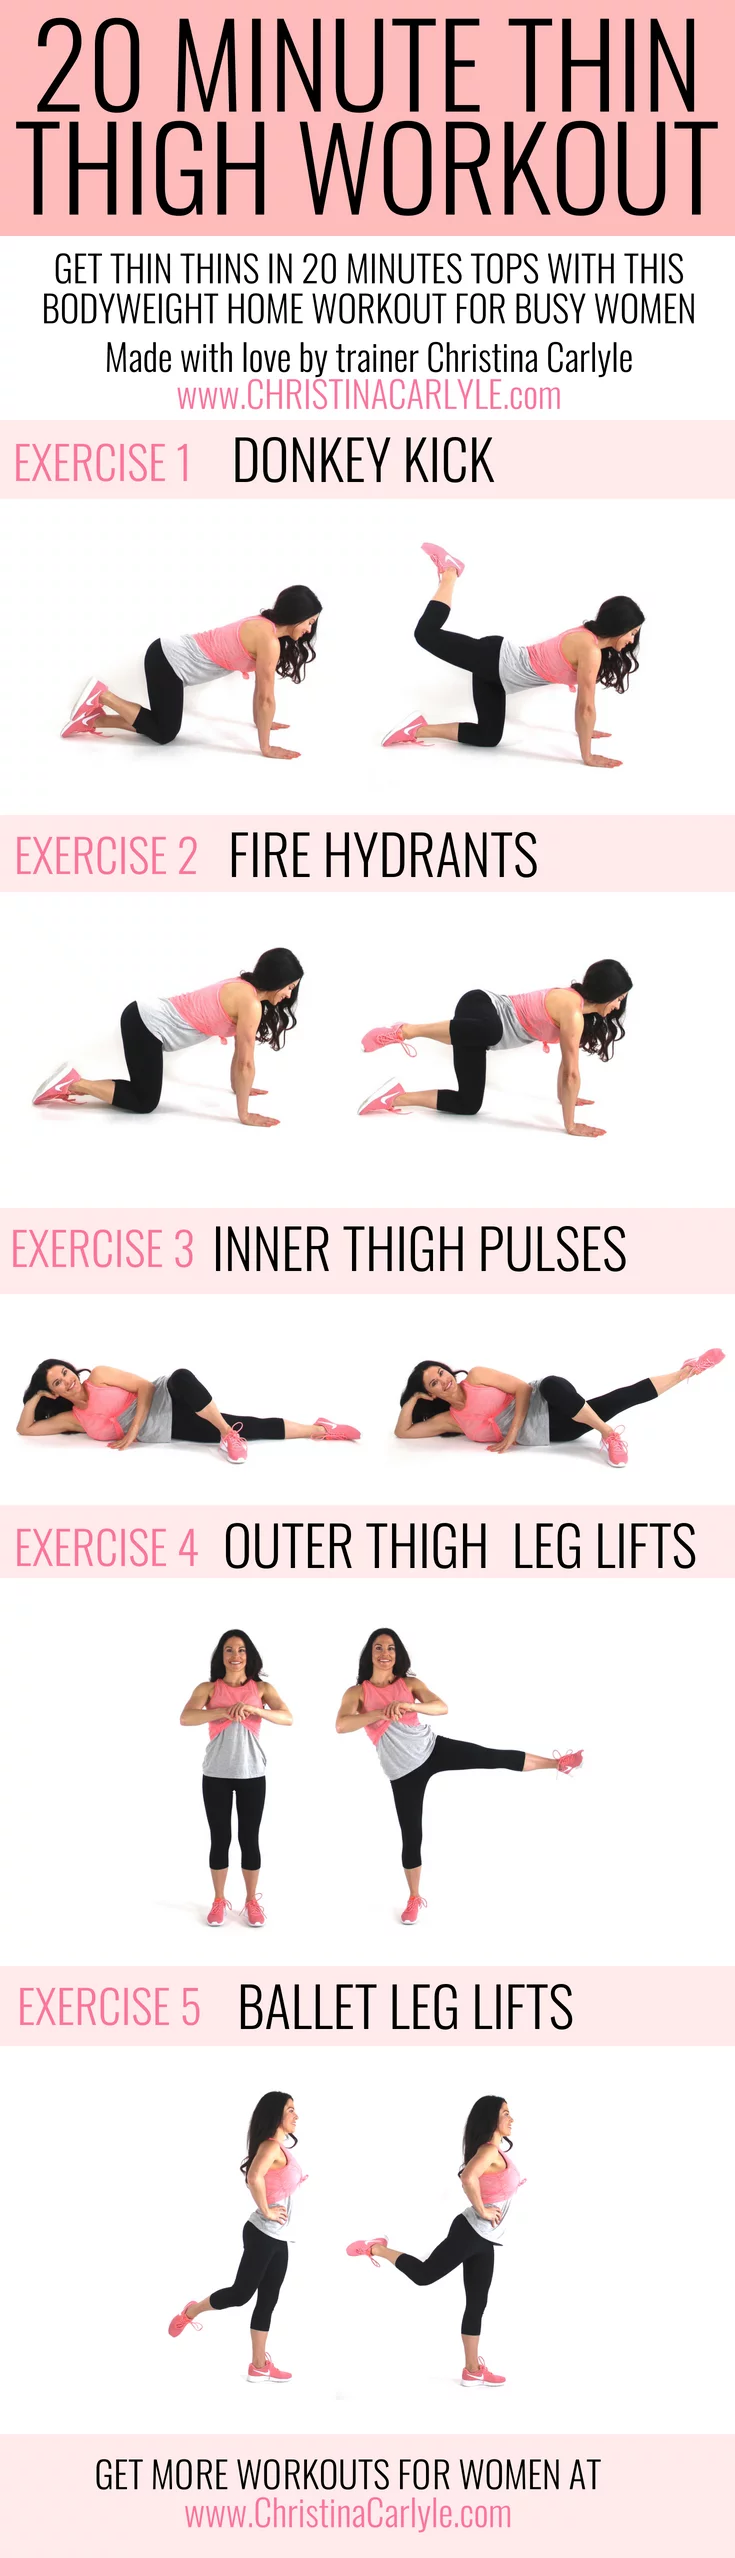 Thin Thigh workout for women | Exercises for Thin Thighs